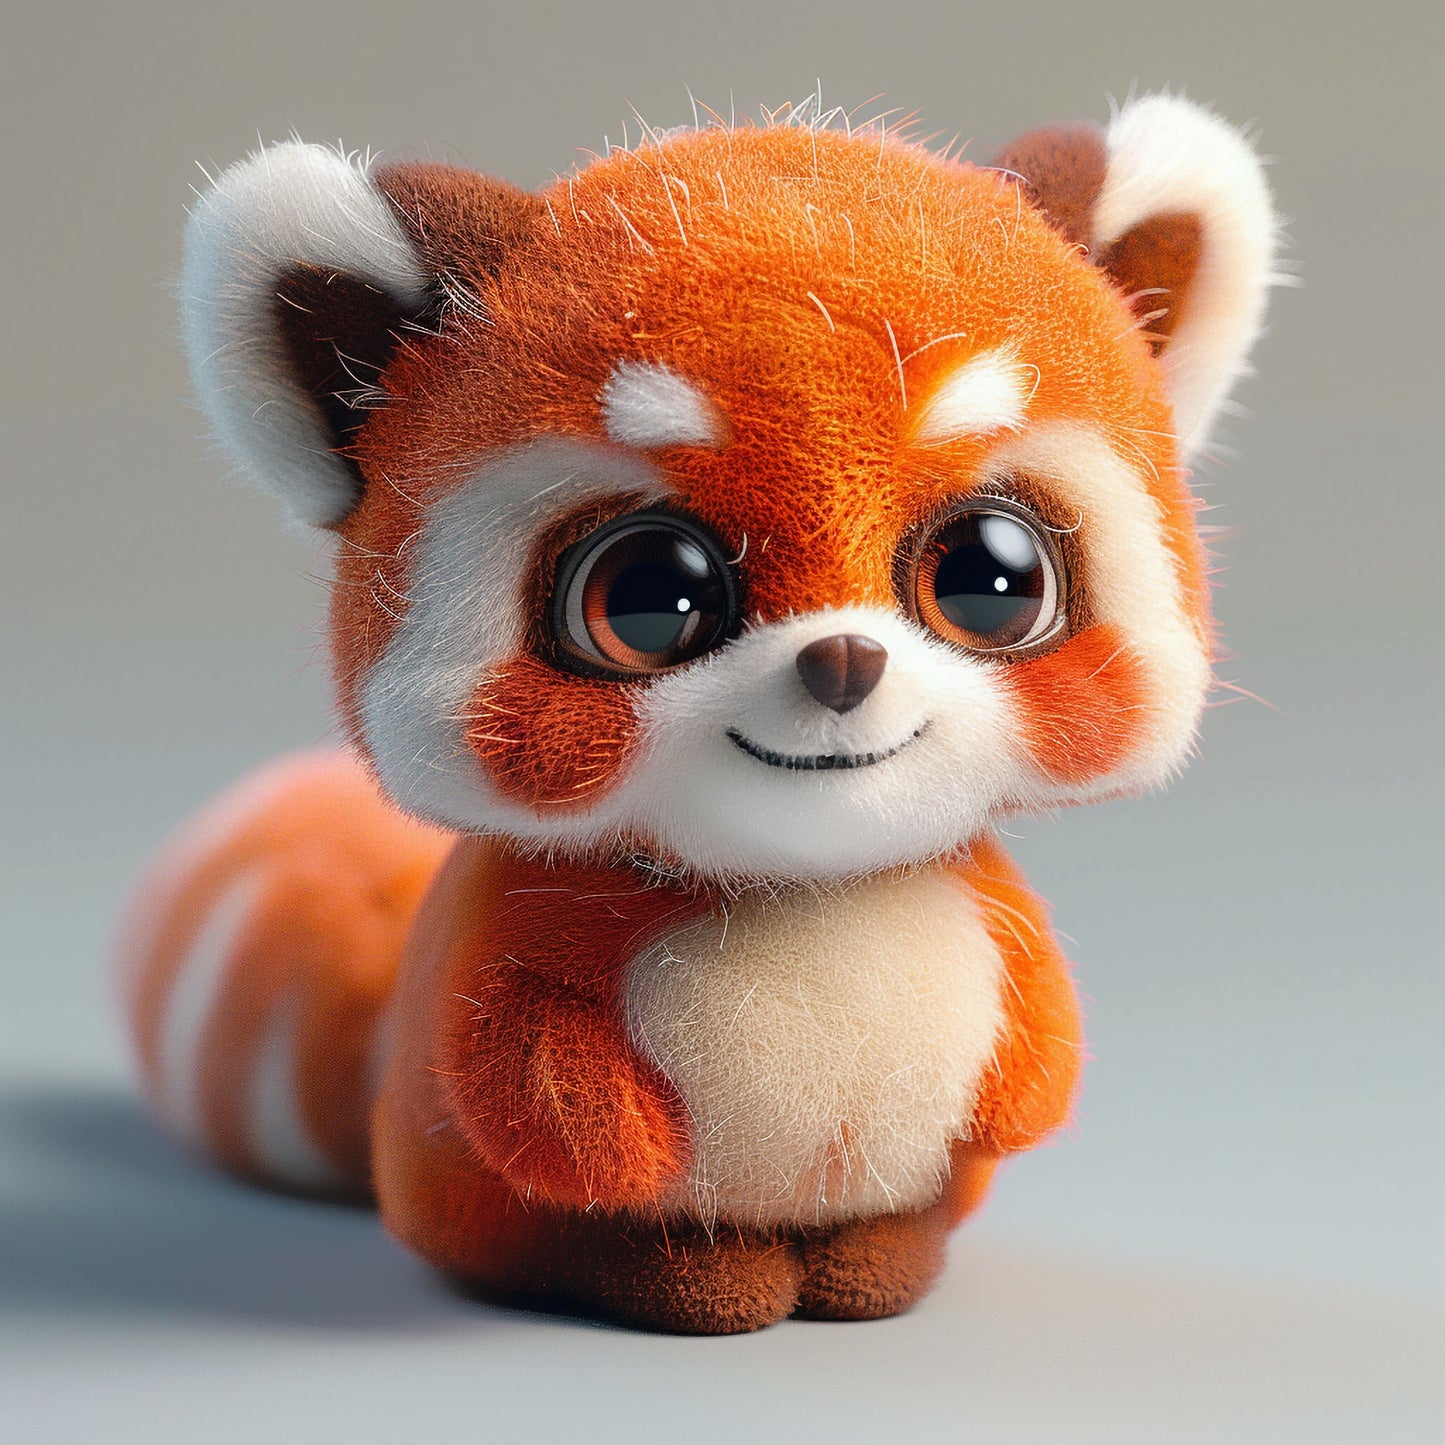 Adorable Needle Felted Red Panda with a Kind Smile